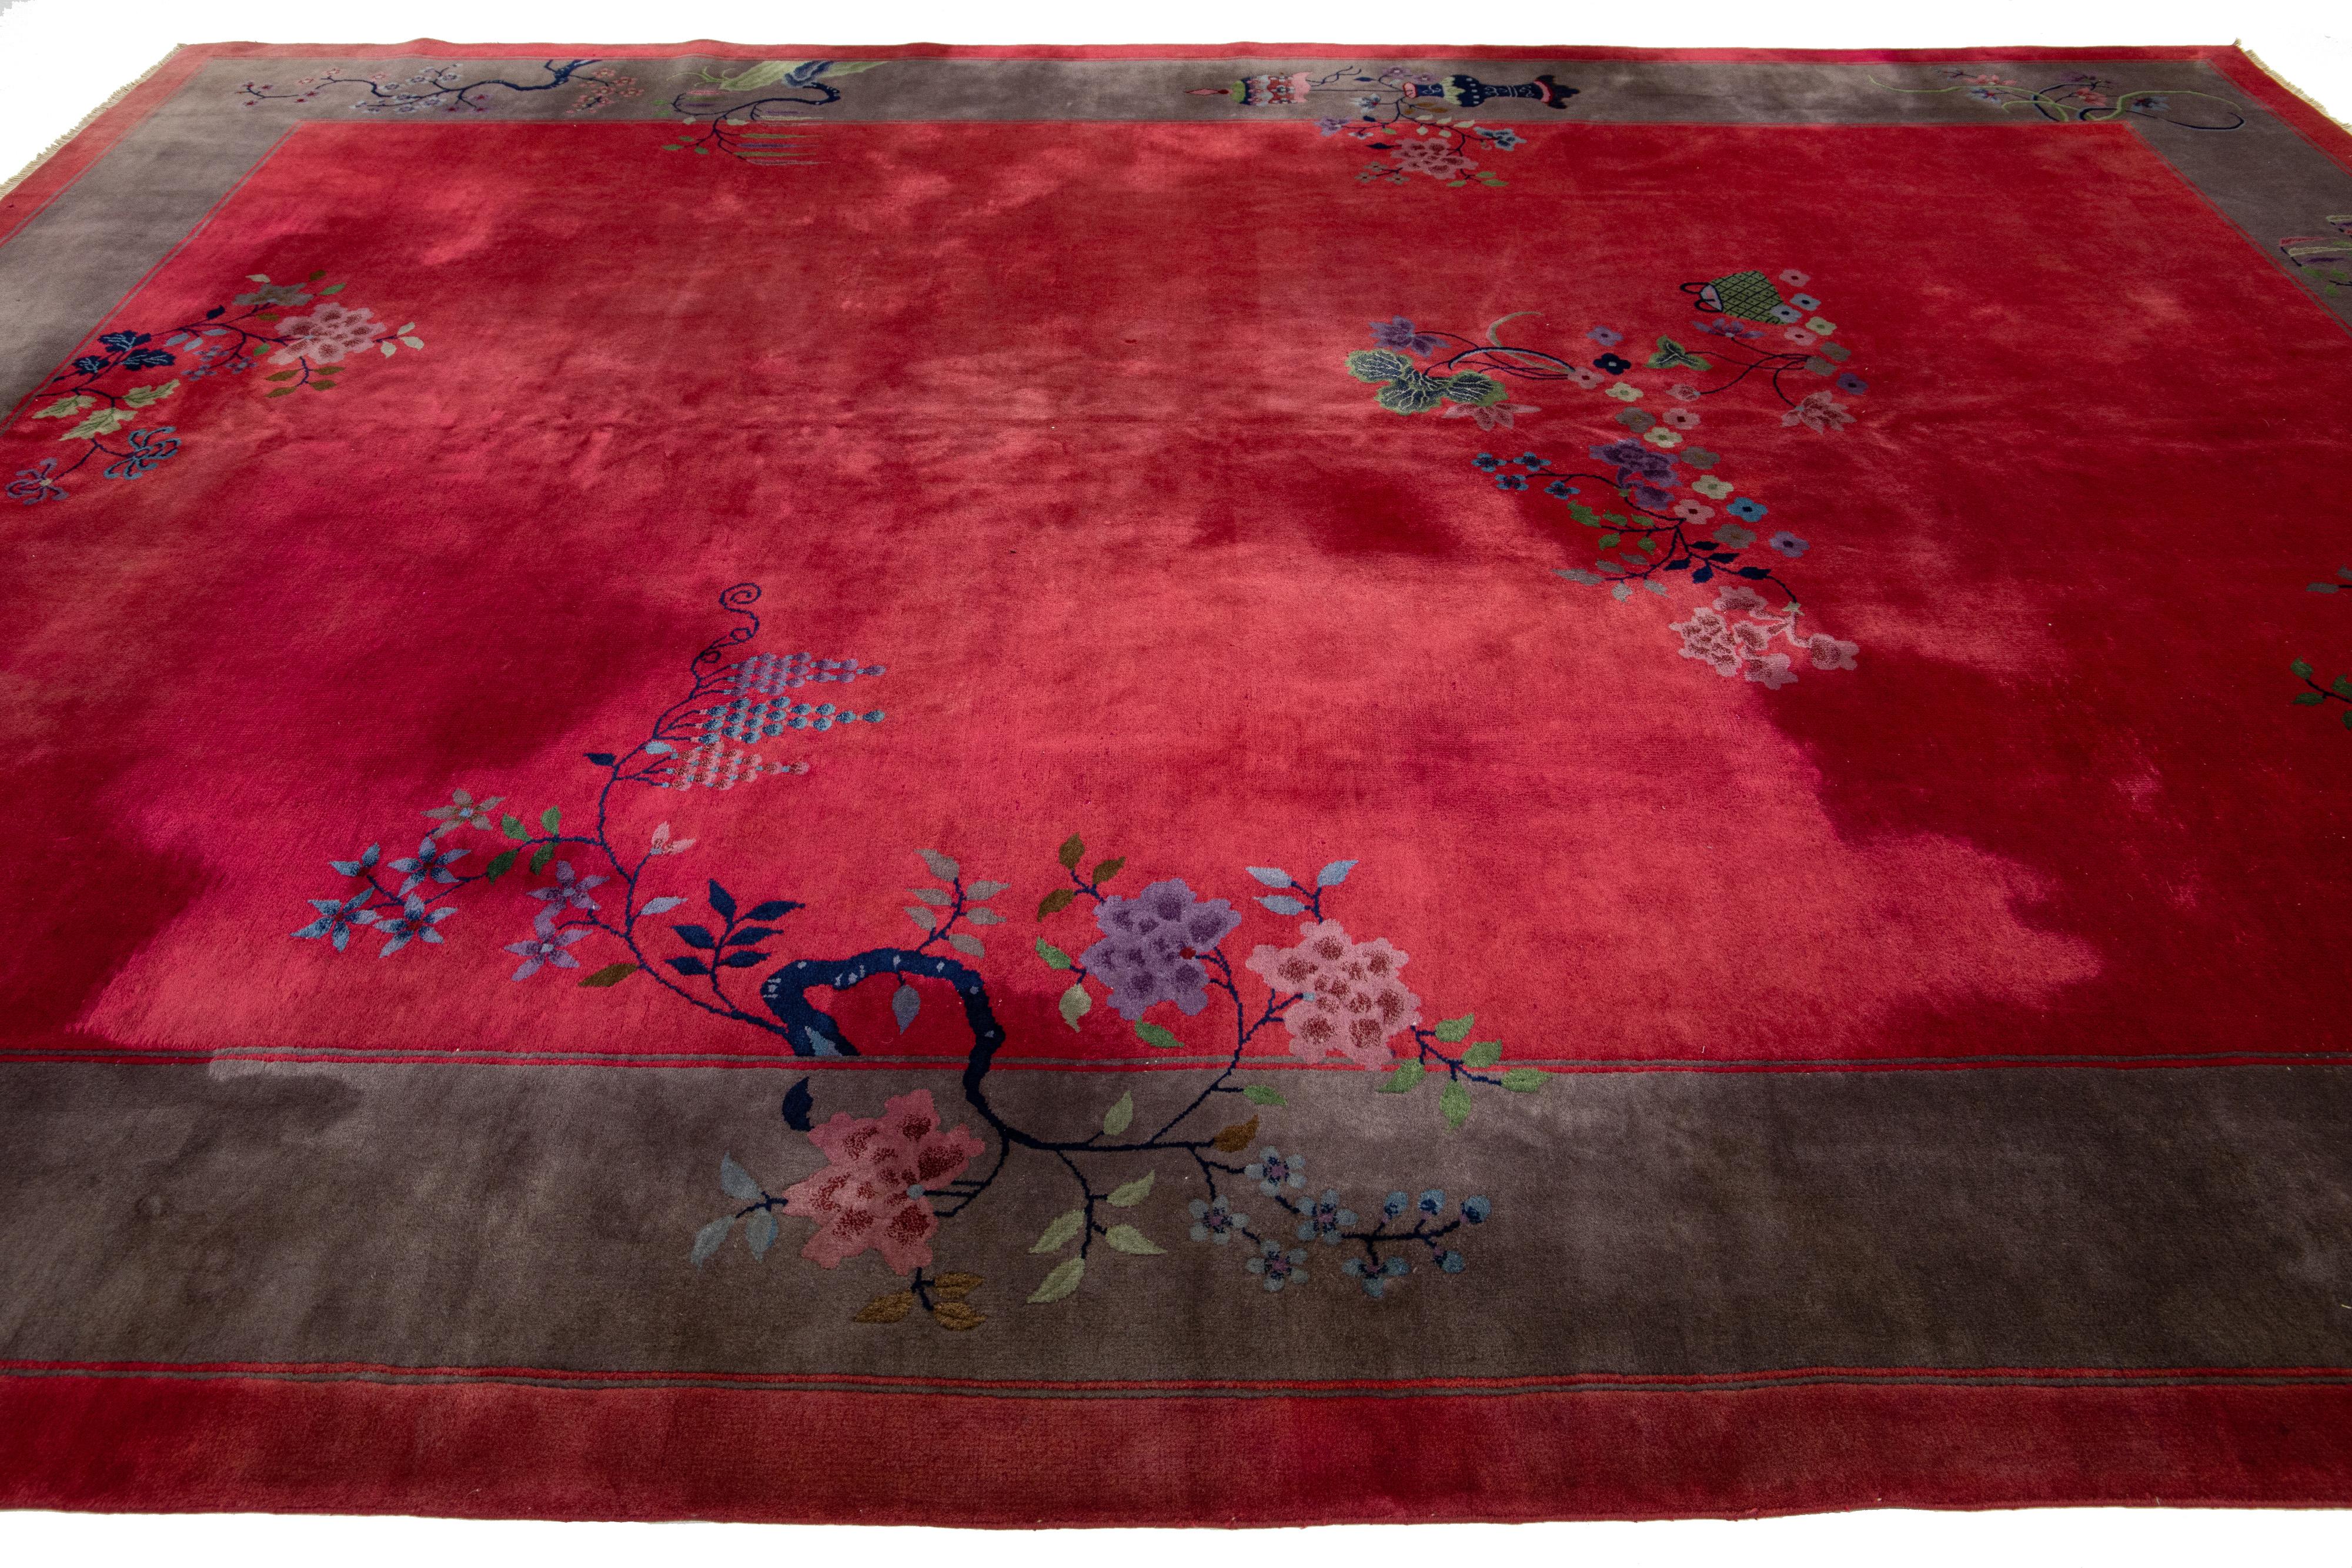 Red Art Deco Chinese Wool Rug with Floral Motif From the 1920s For Sale 1